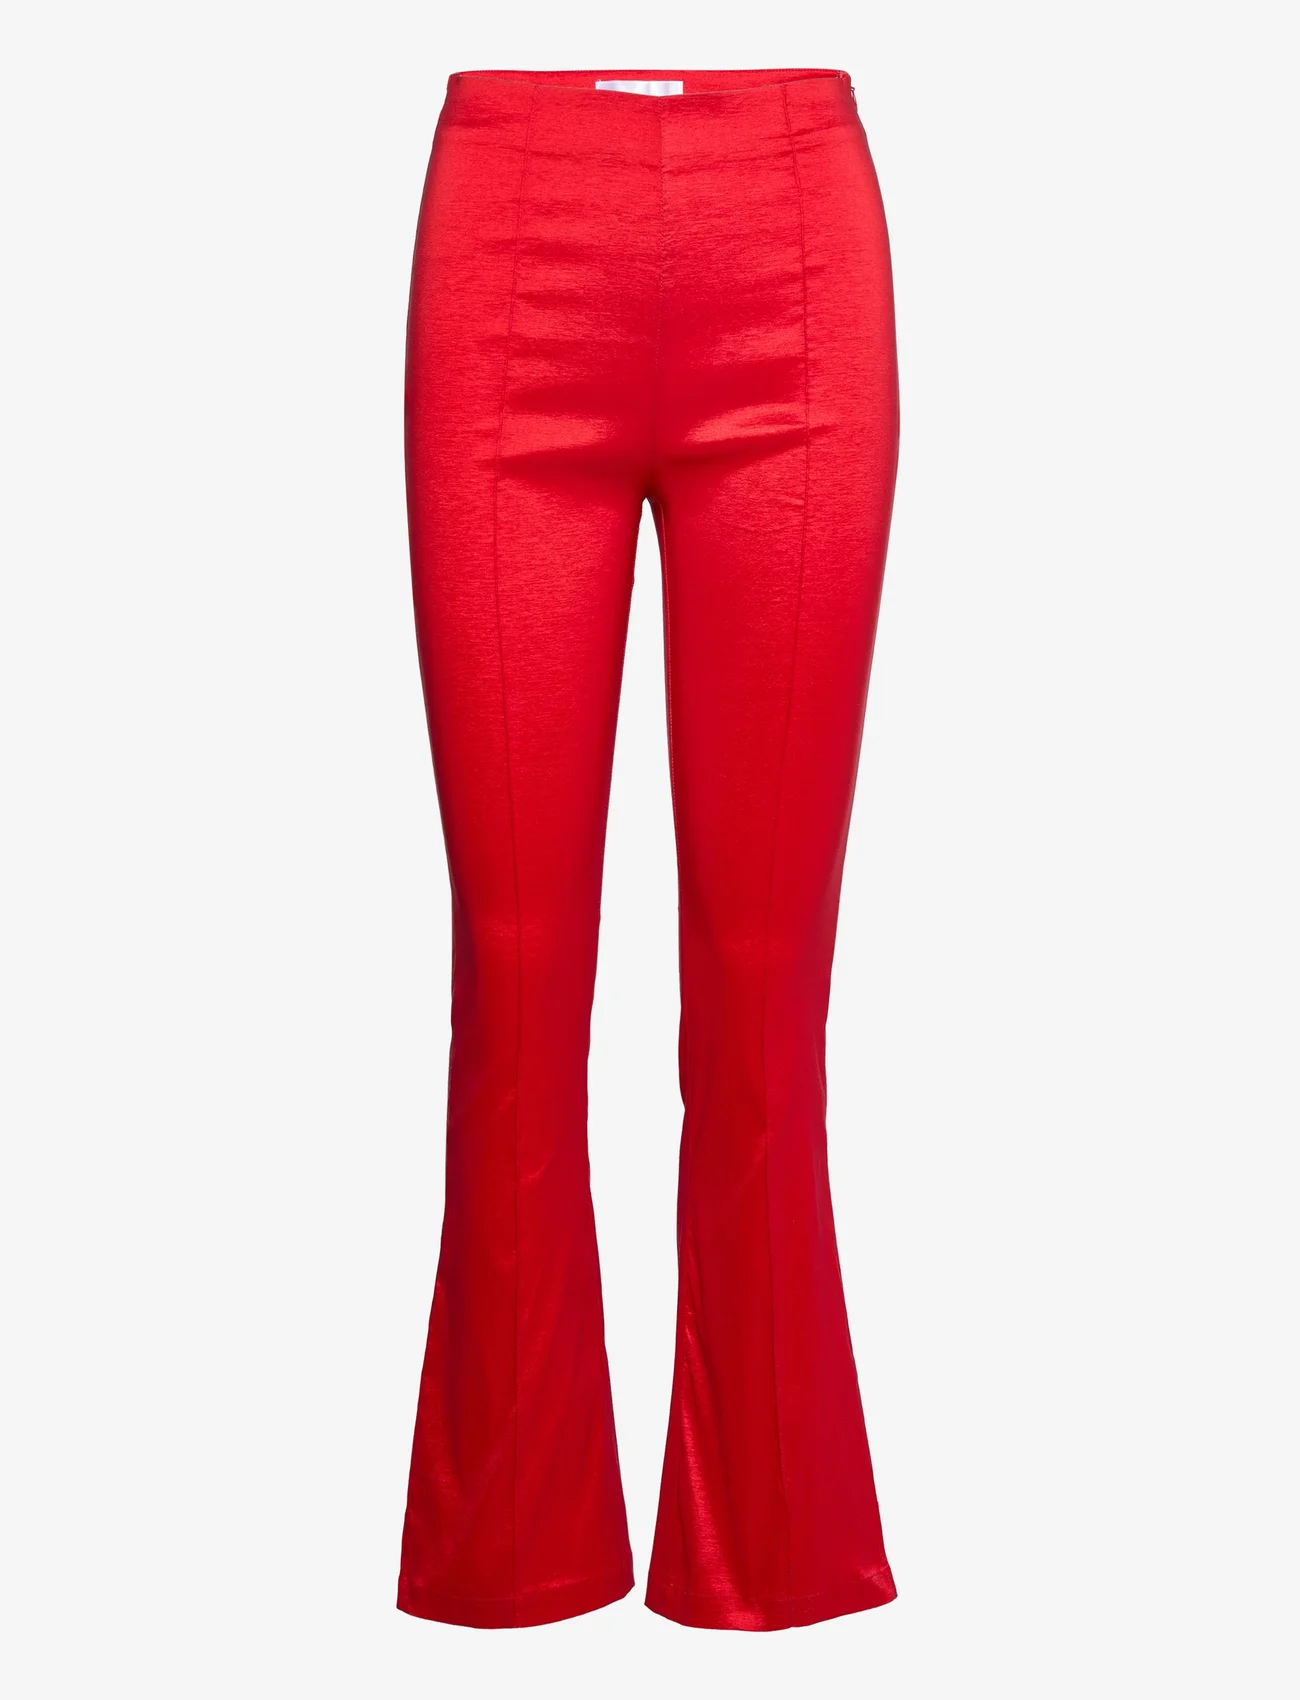 Hosbjerg - Glory Pants - trousers - red - 0